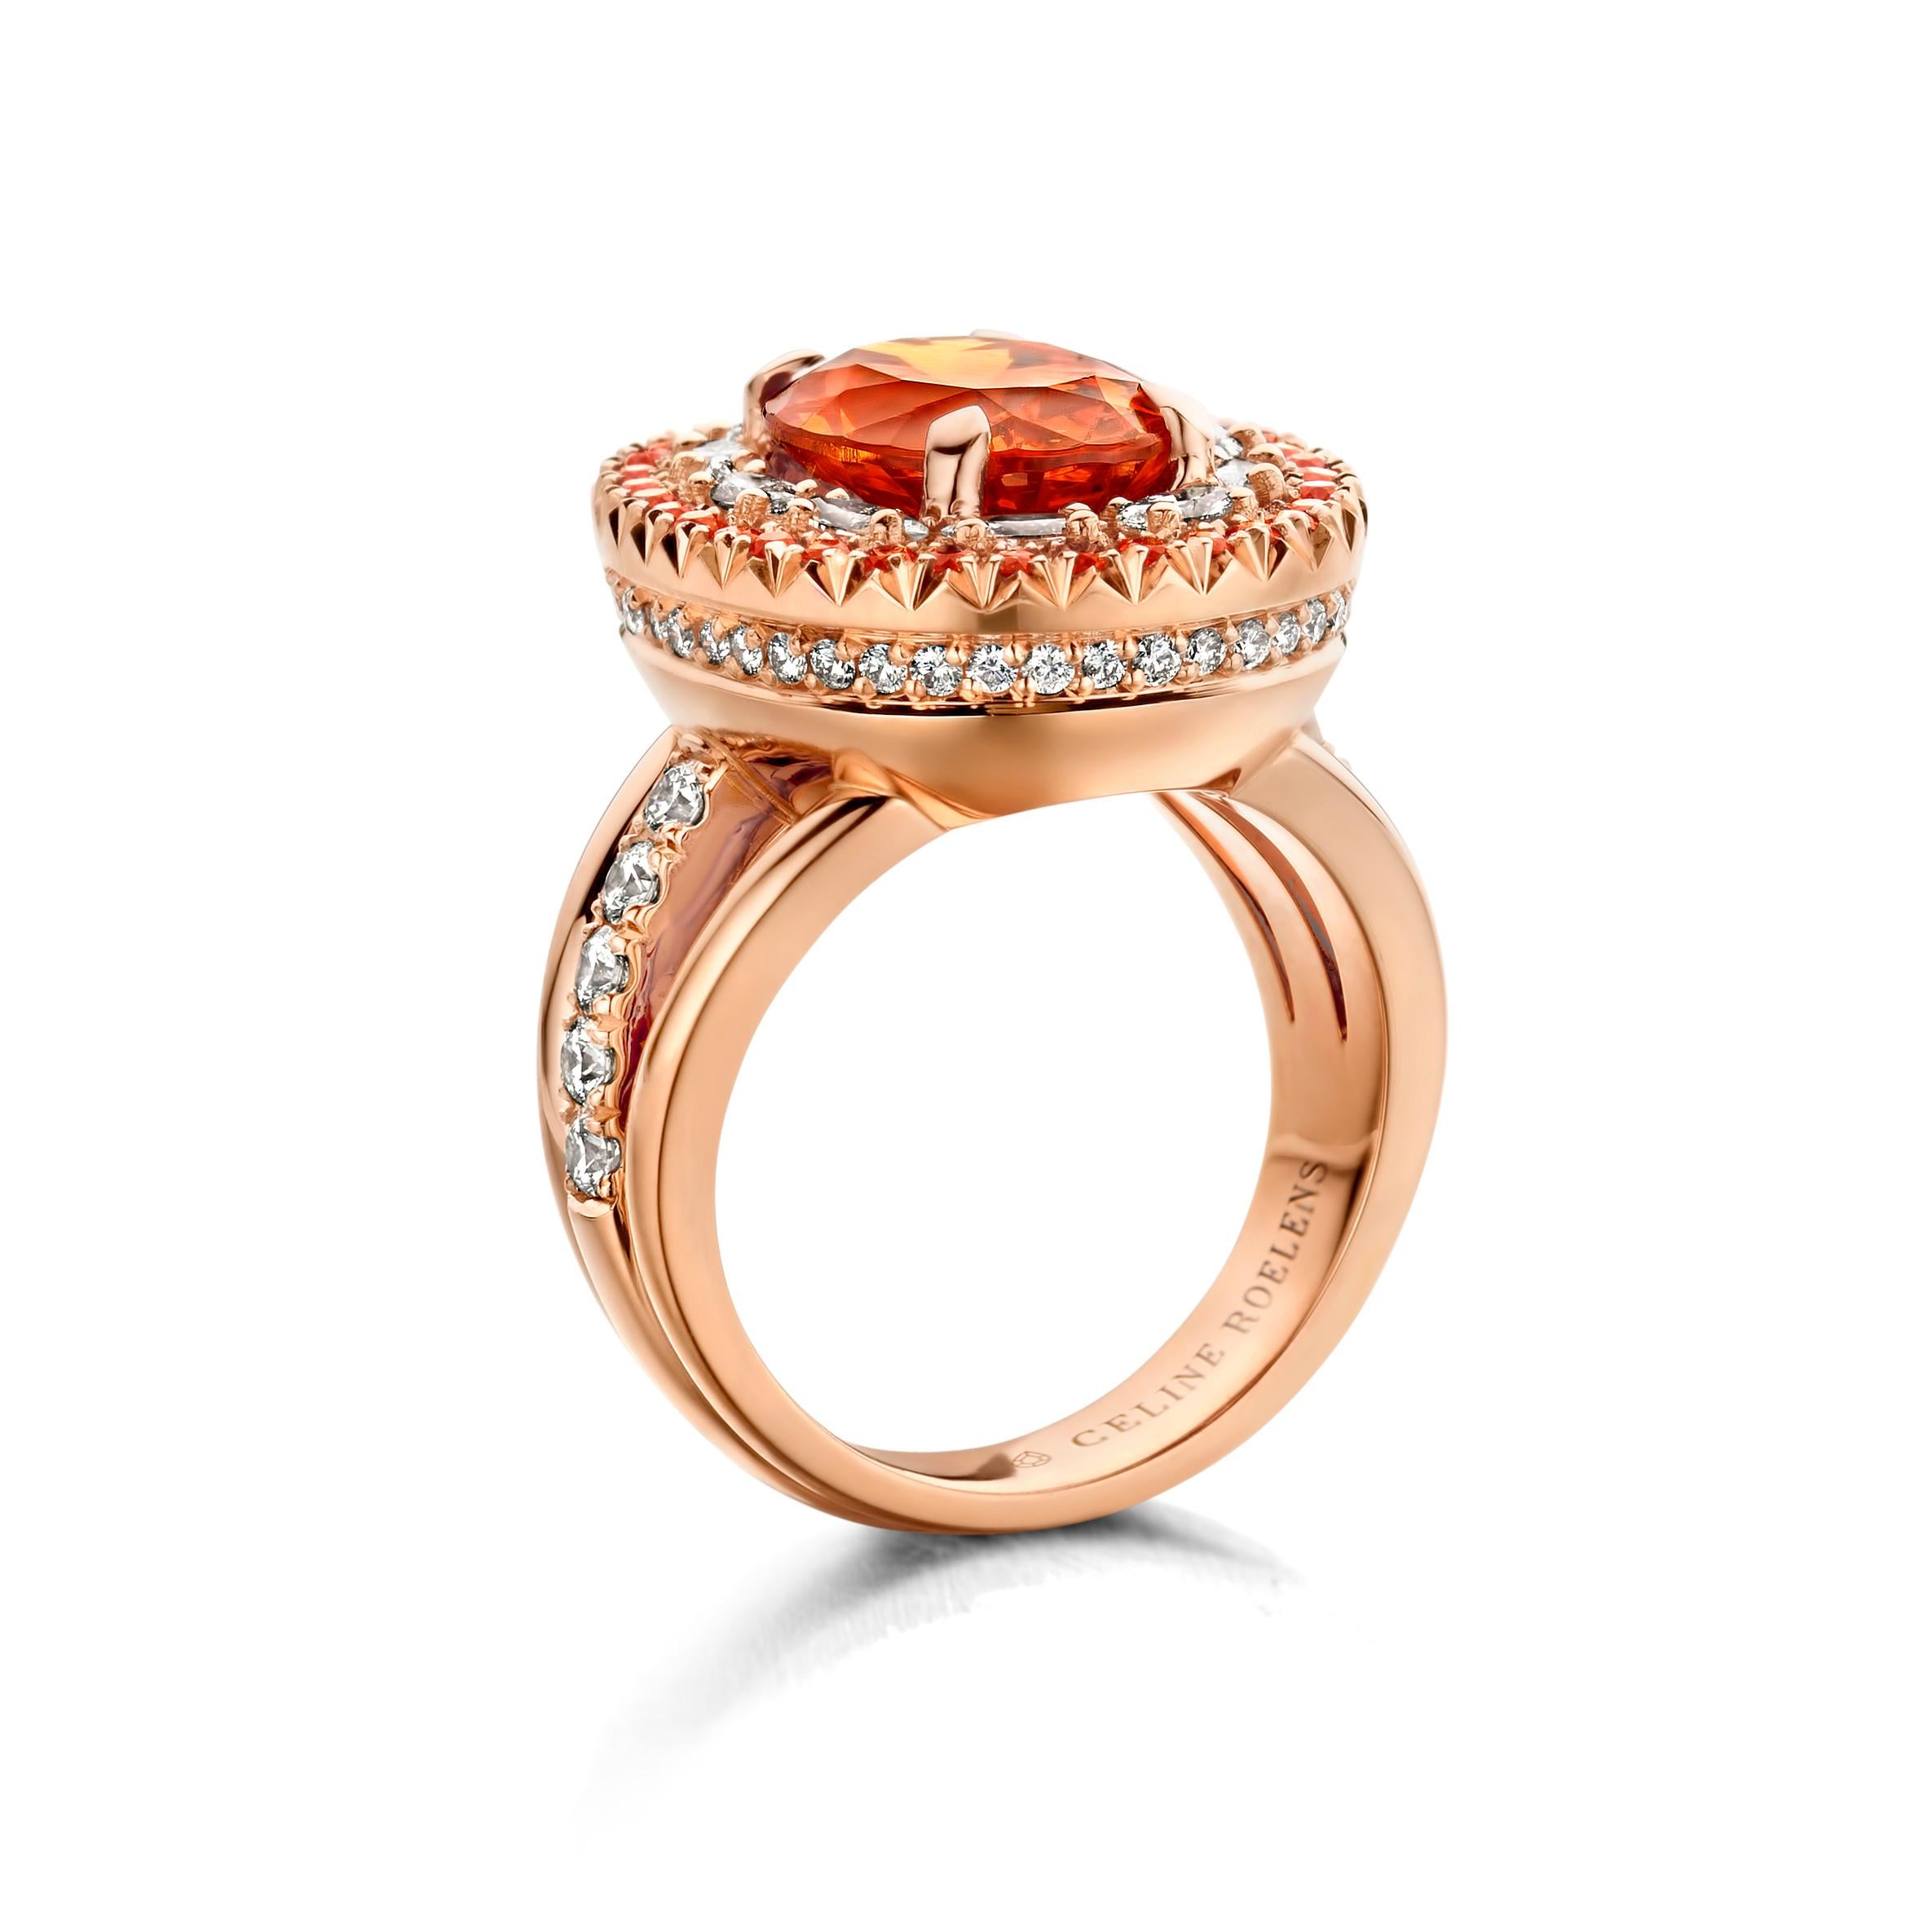 Stunning One of a kind cocktail ring (17,35g) in 18-Karat rose gold set with 1 eye clean oval cut 6.78 carat Mandarin Garnet, 34 brilliant cut orange sapphires (0.34 Carat) and the finest white diamonds:  10 marquise cut diamonds (0.73 Carat) and 52